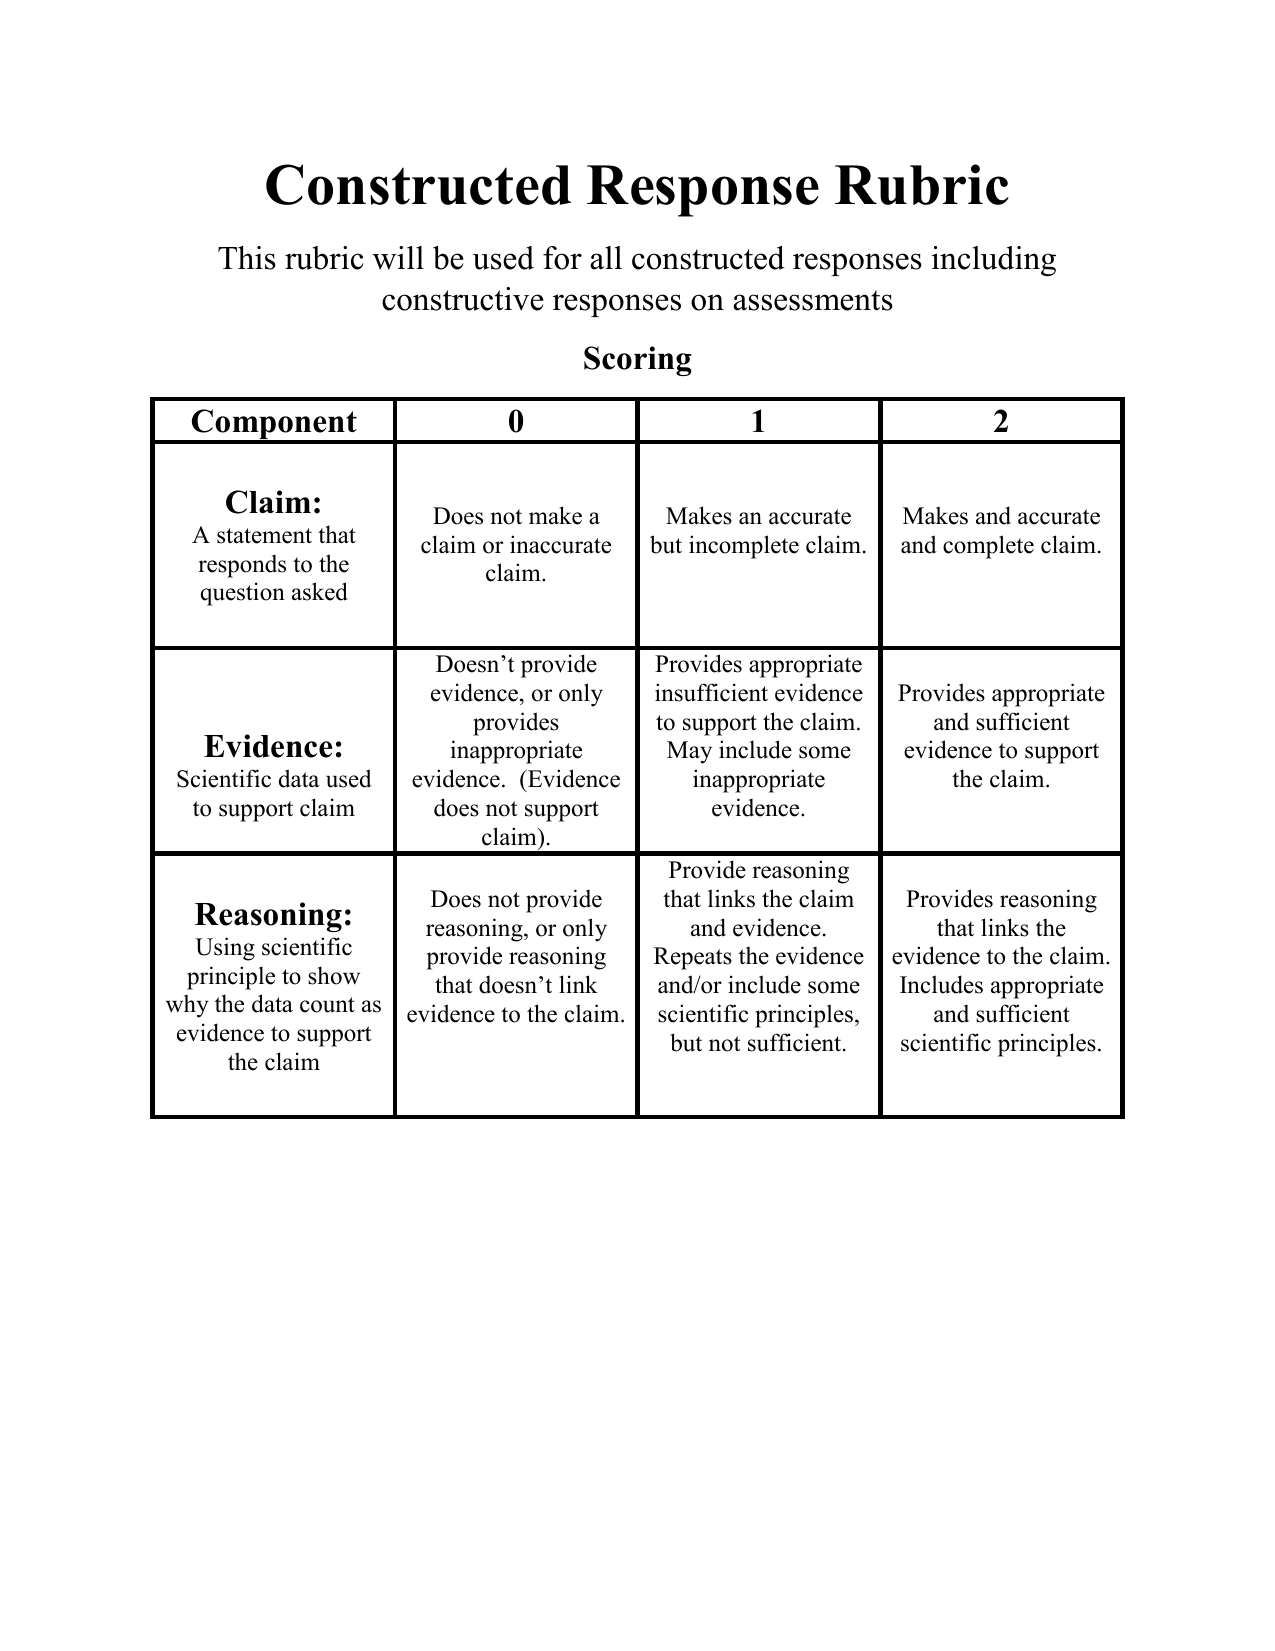 constructed-response-rubric